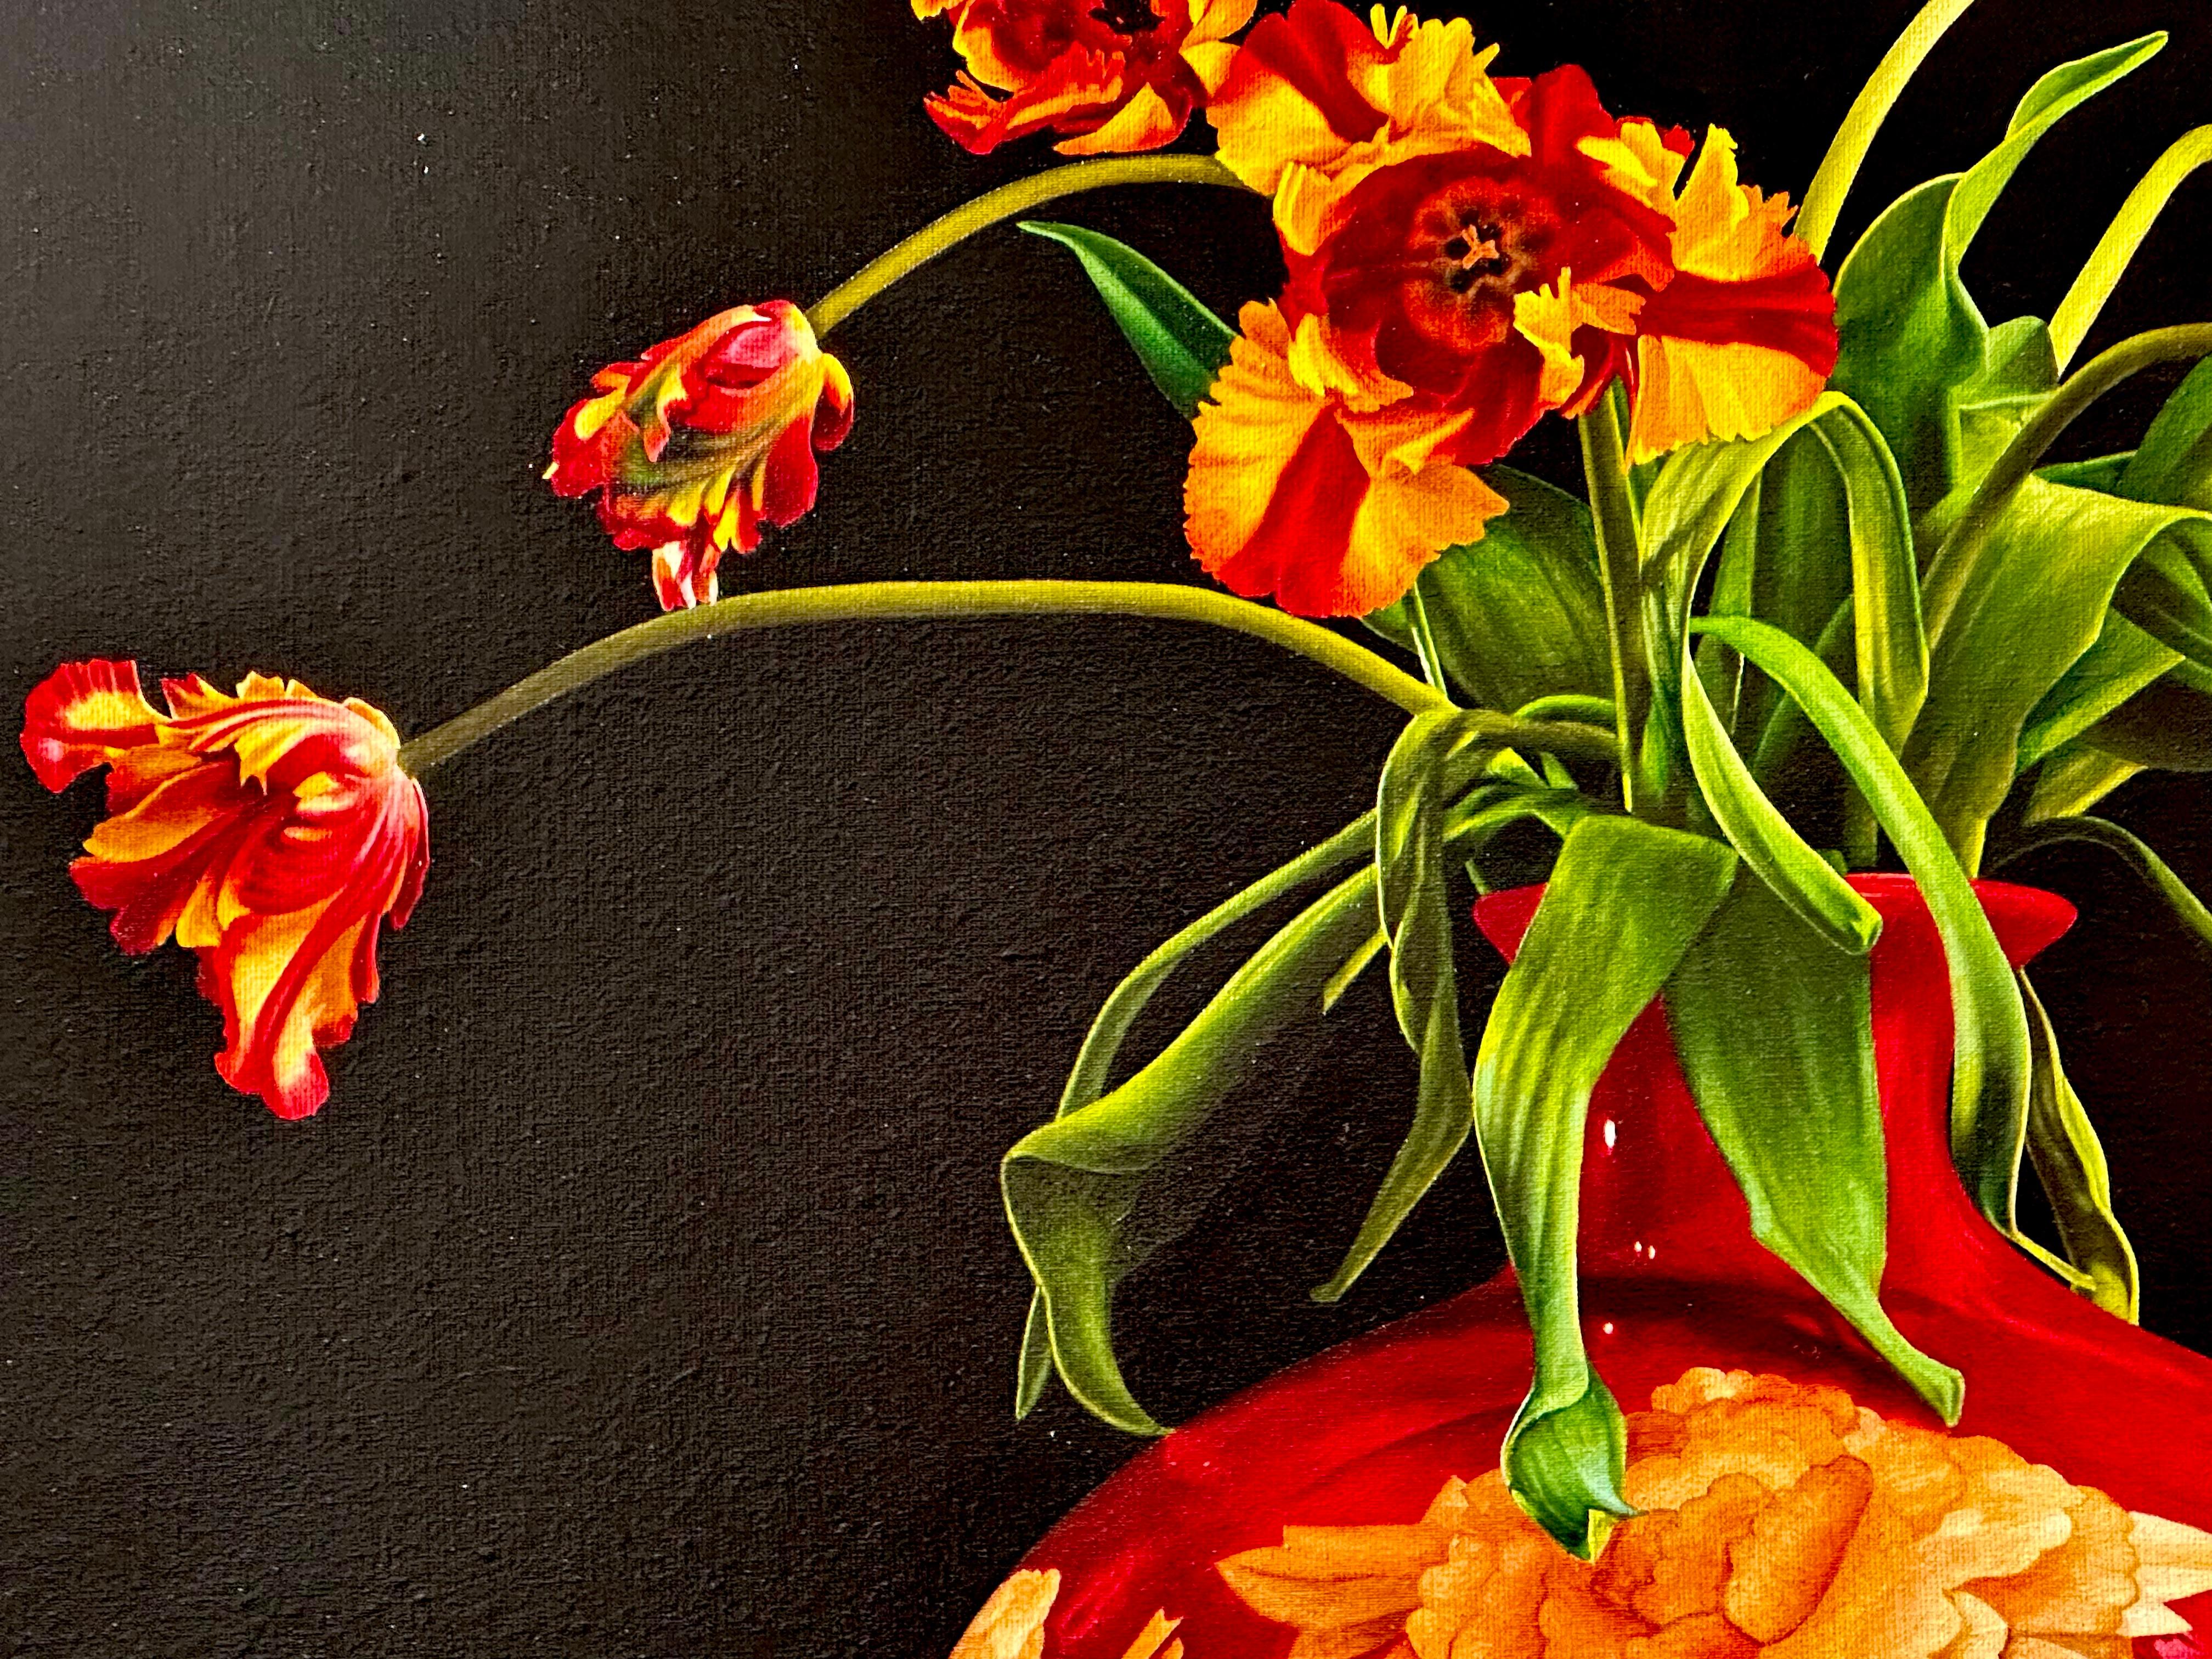 Tulips in red and yellow in Red Vase -21st Century Realistic Flower Painting  For Sale 2